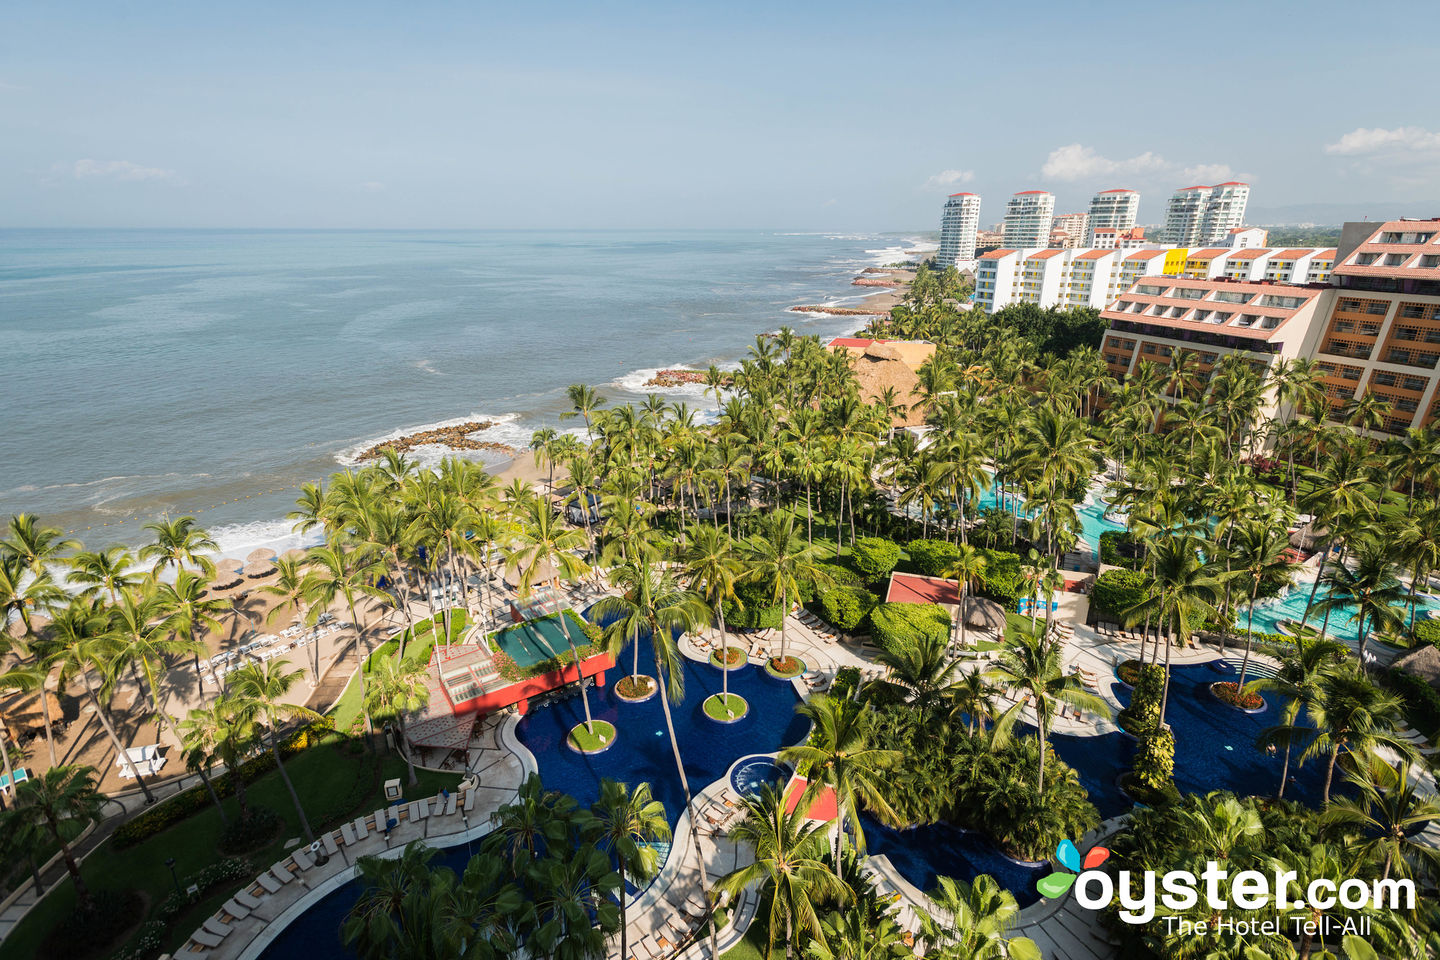 Club Regina Puerto Vallarta Review: What To REALLY Expect If You Stay